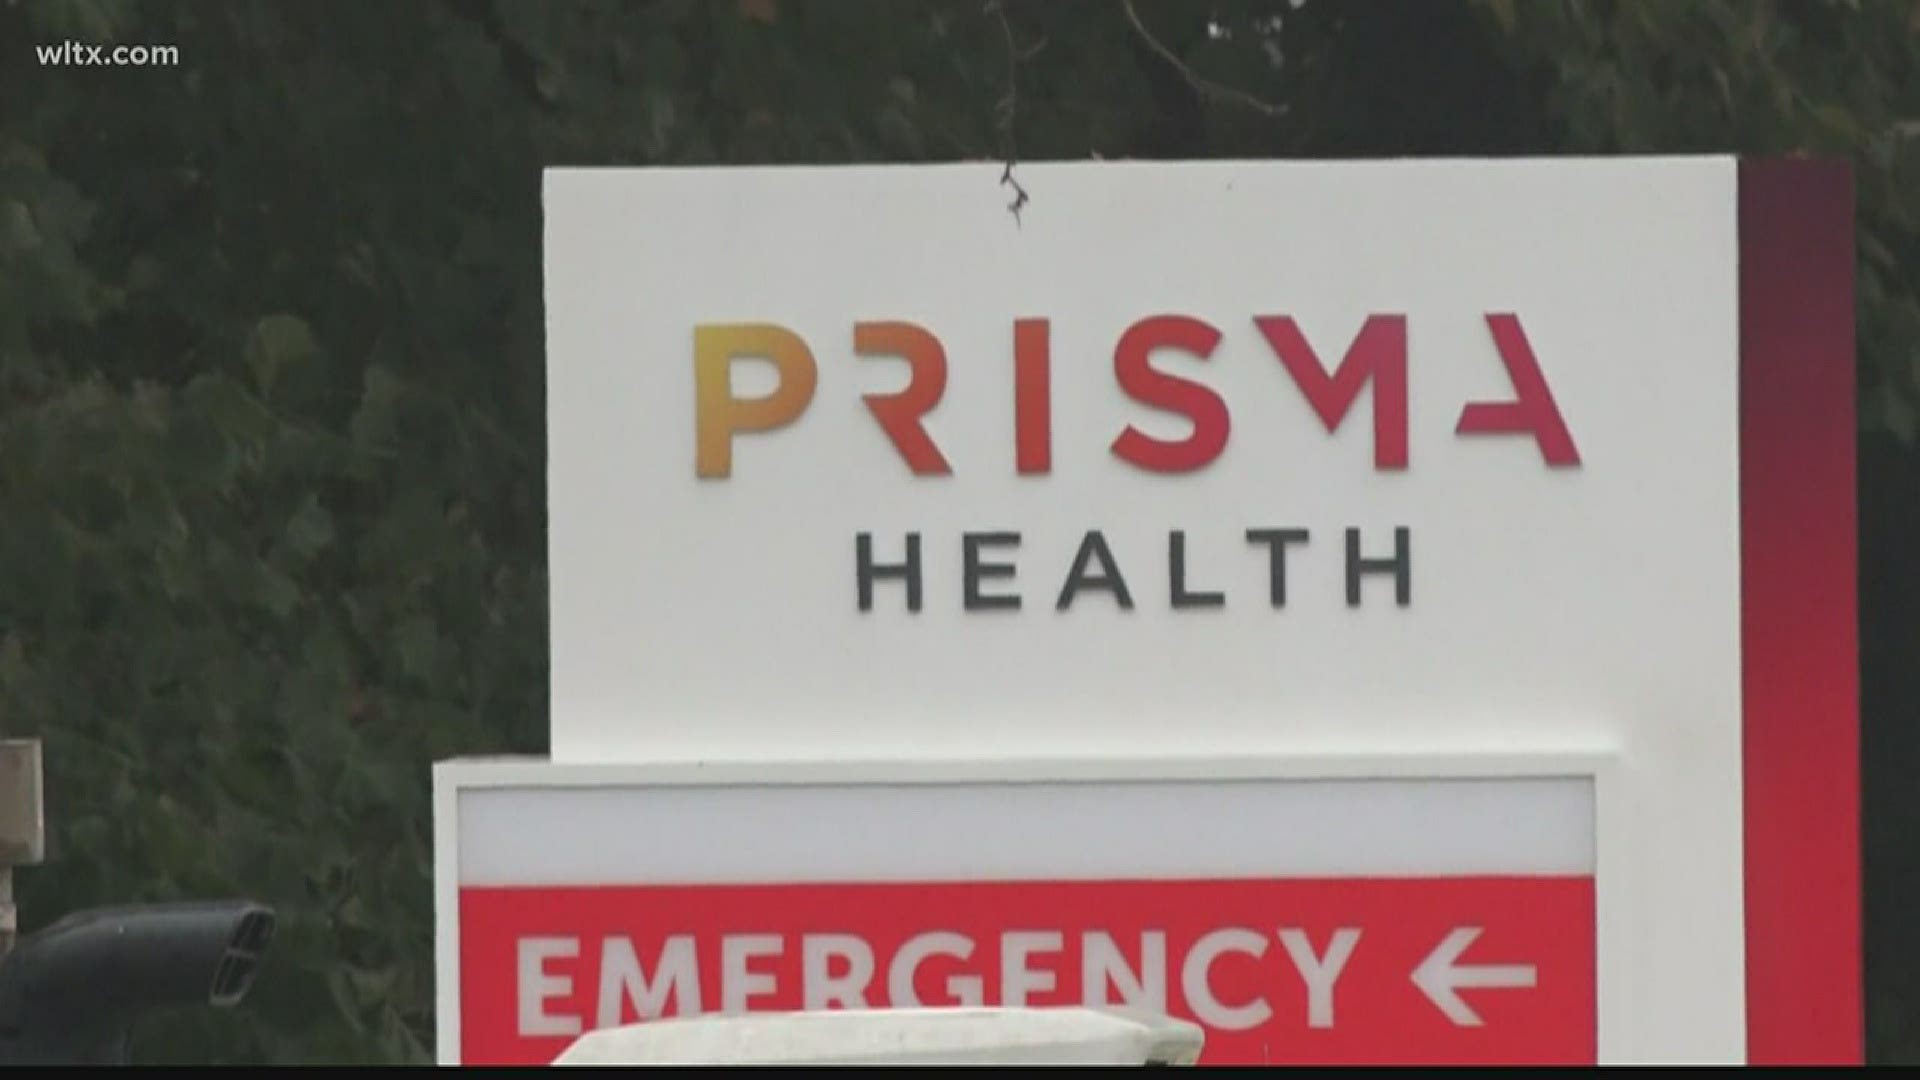 A Prisma Health official recently said their treatment of patients with COVID-19 doubled in the last several weeks, especially in young people.